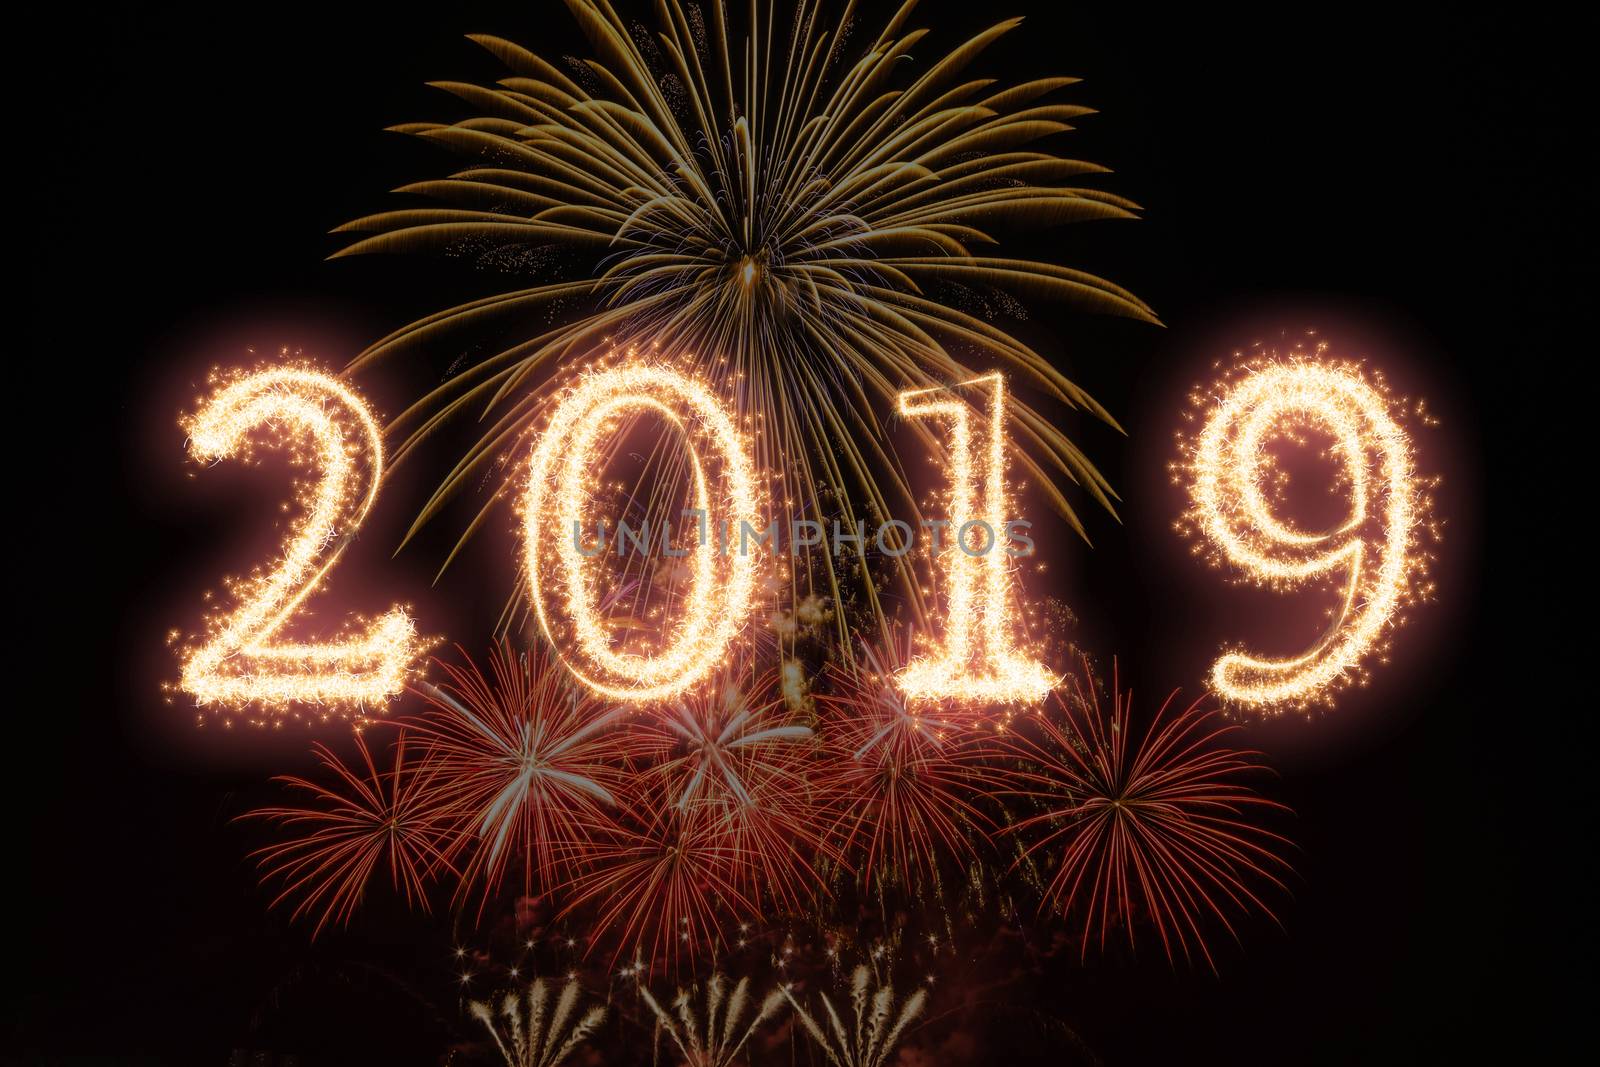 2019 written with Sparkle firework on fireworks with dark backgr by Tzido